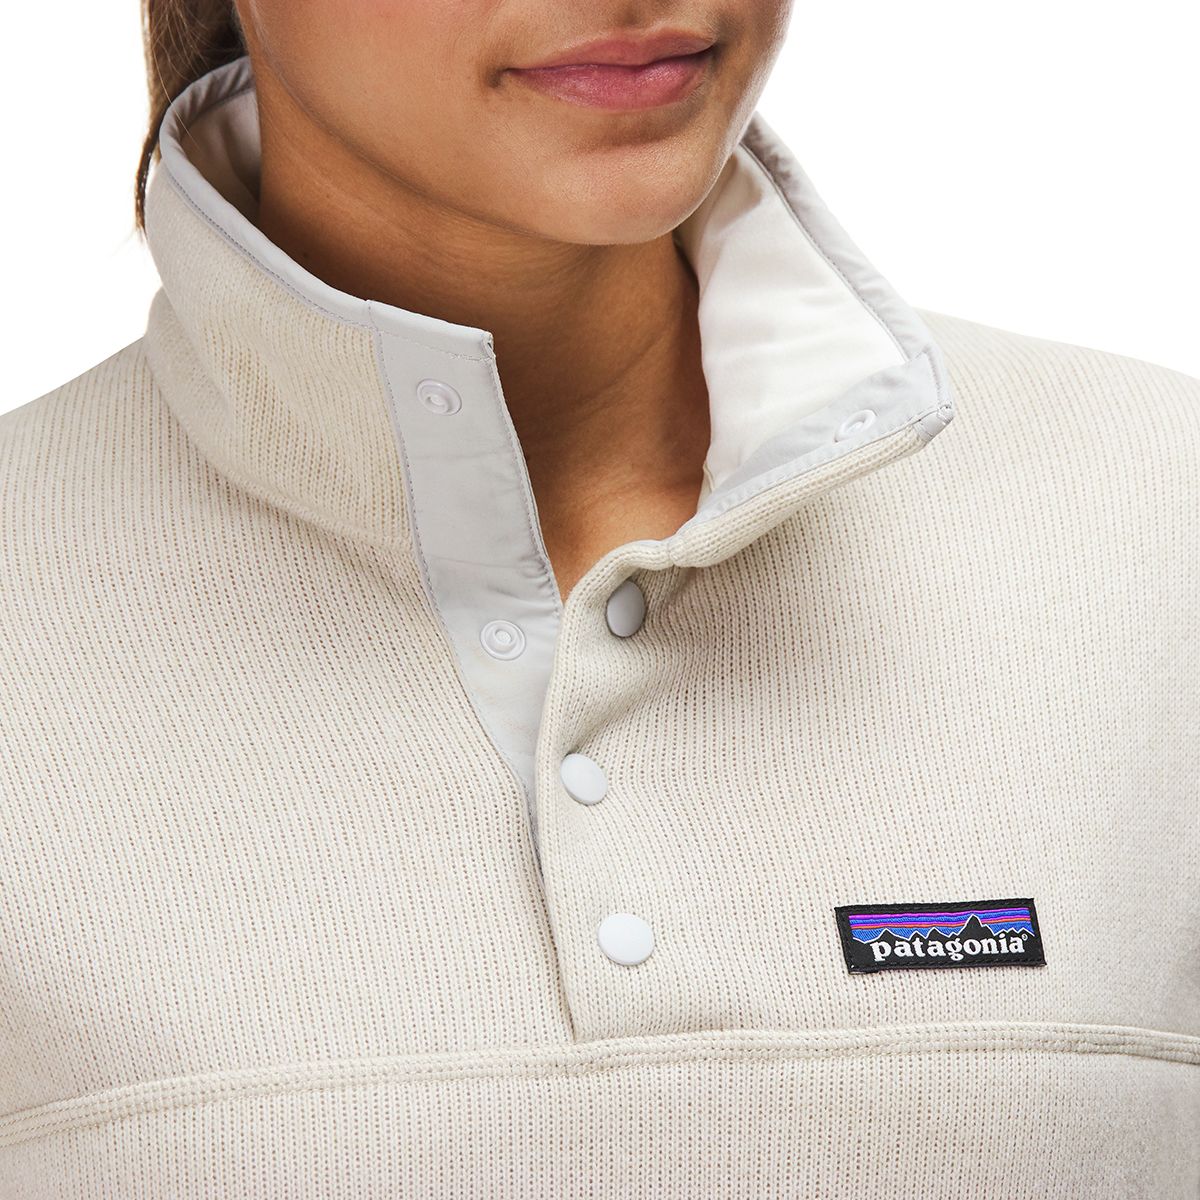 Patagonia Lightweight Better Sweater Marsupial Pullover - Women's